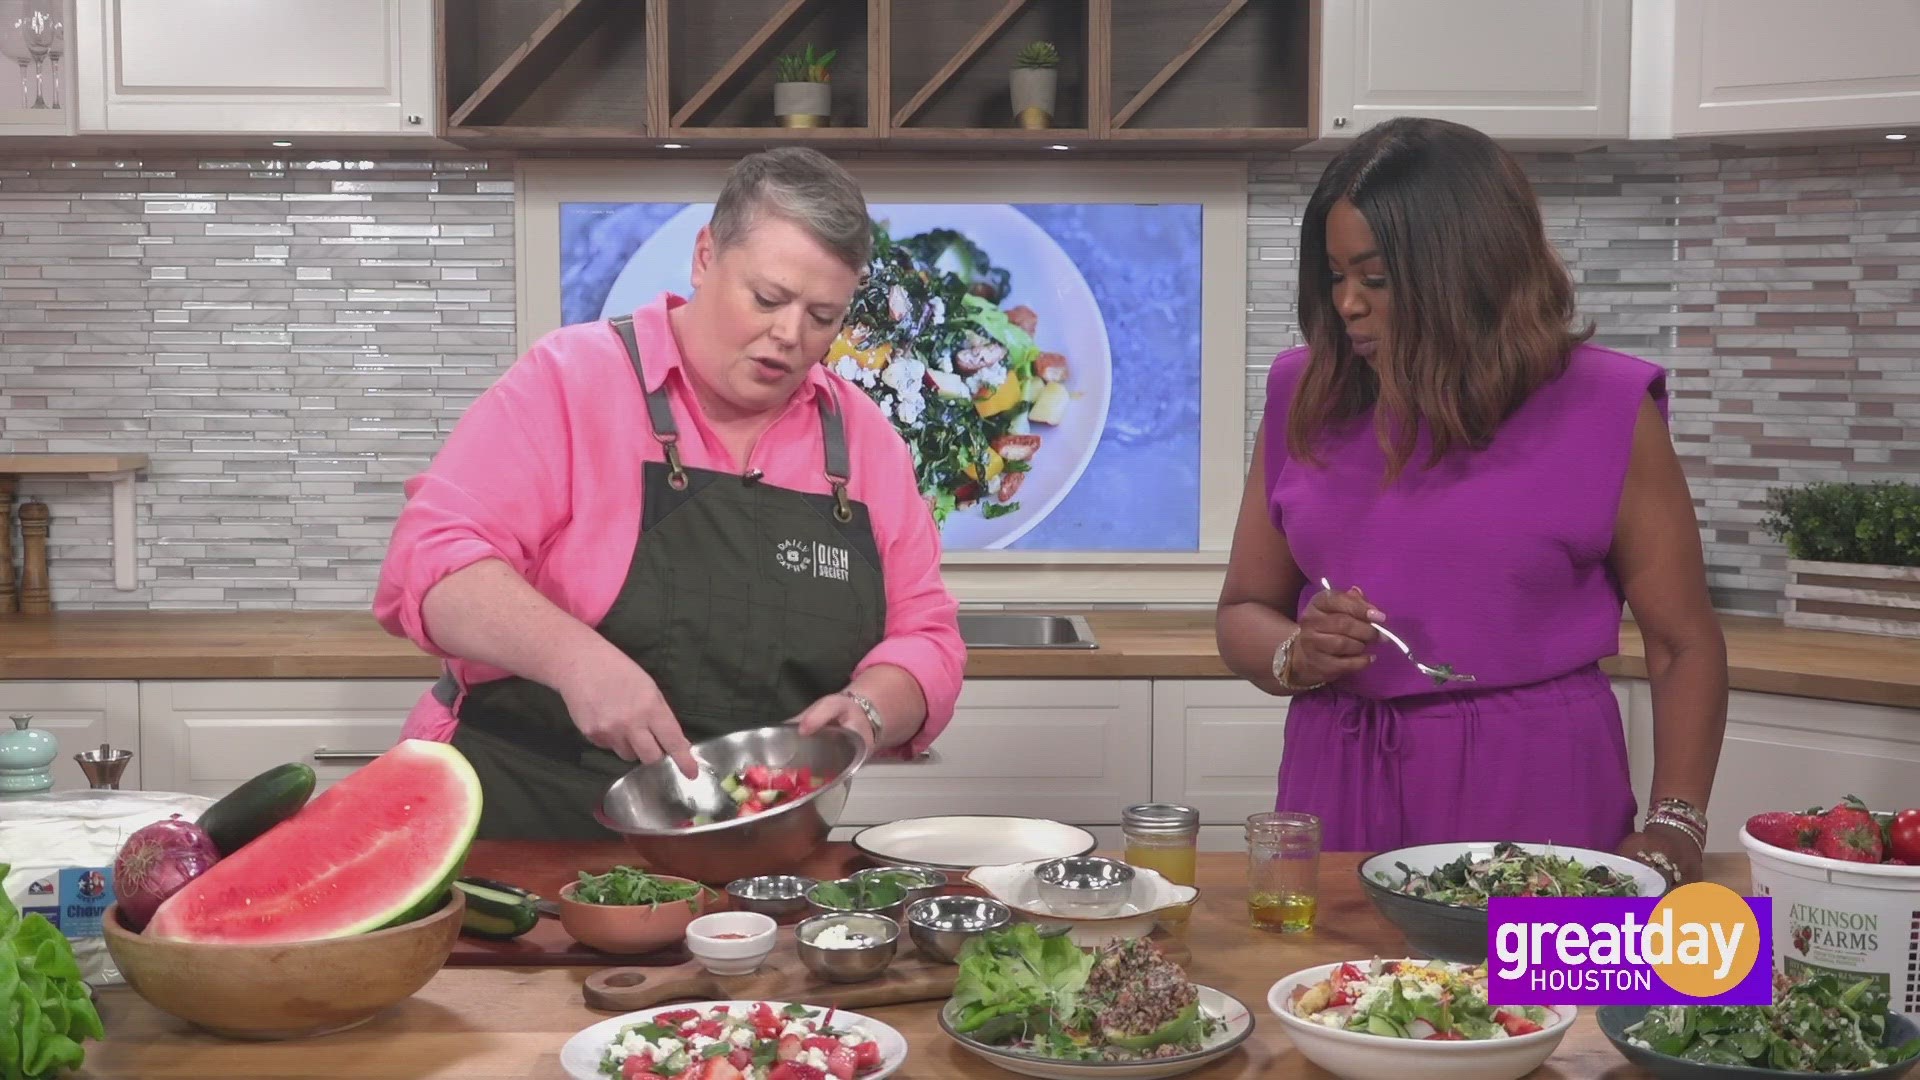 Chef Brandi Key with Daily Gather and Dish Society shares how to make salads to look forward to eating.